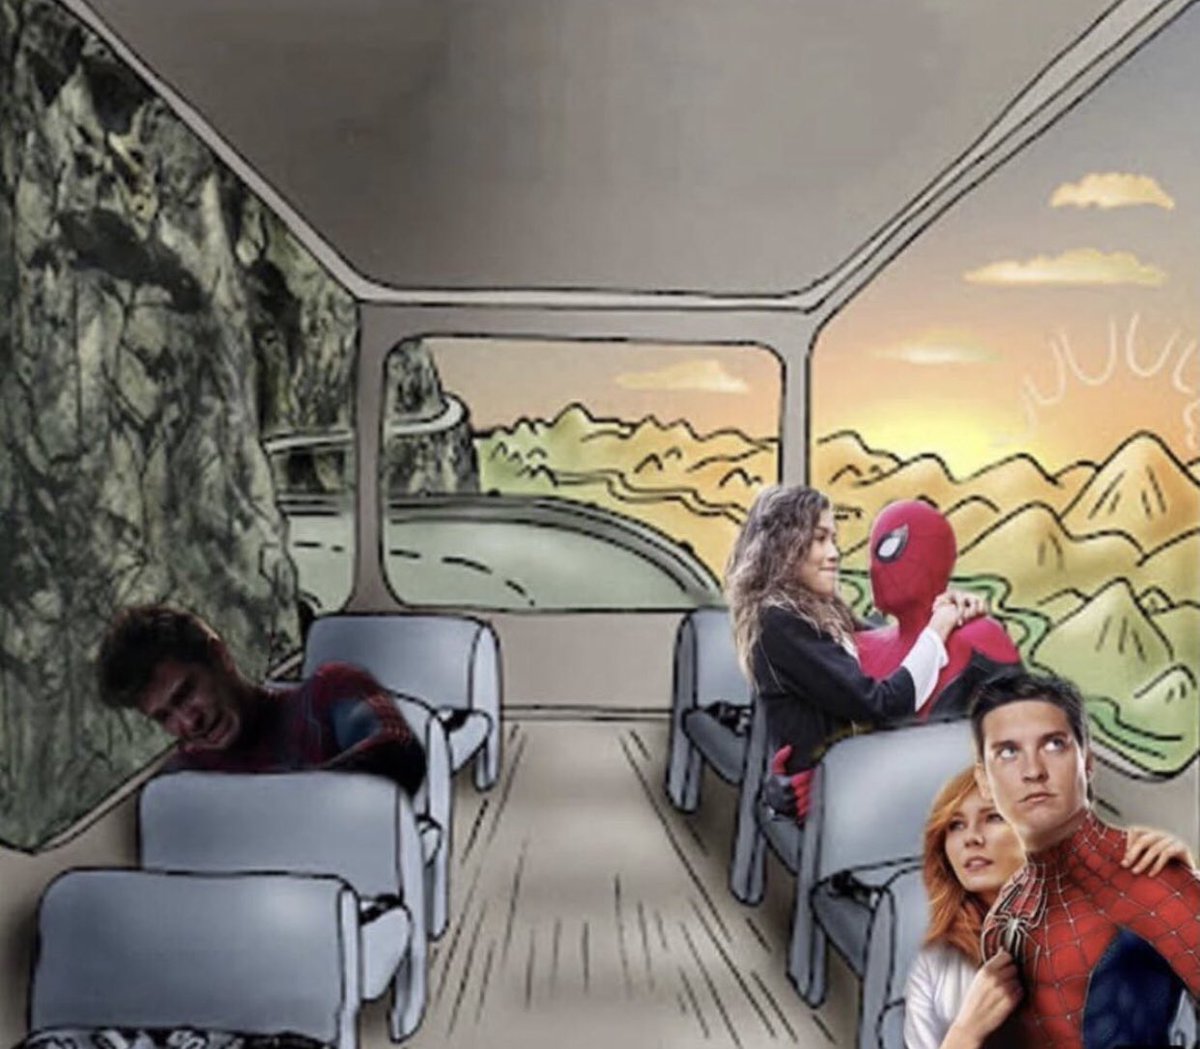 RT @SpadesEnder: This is one of the coldest Spider-Man memes I've seen https://t.co/fzXLUyW2Cw